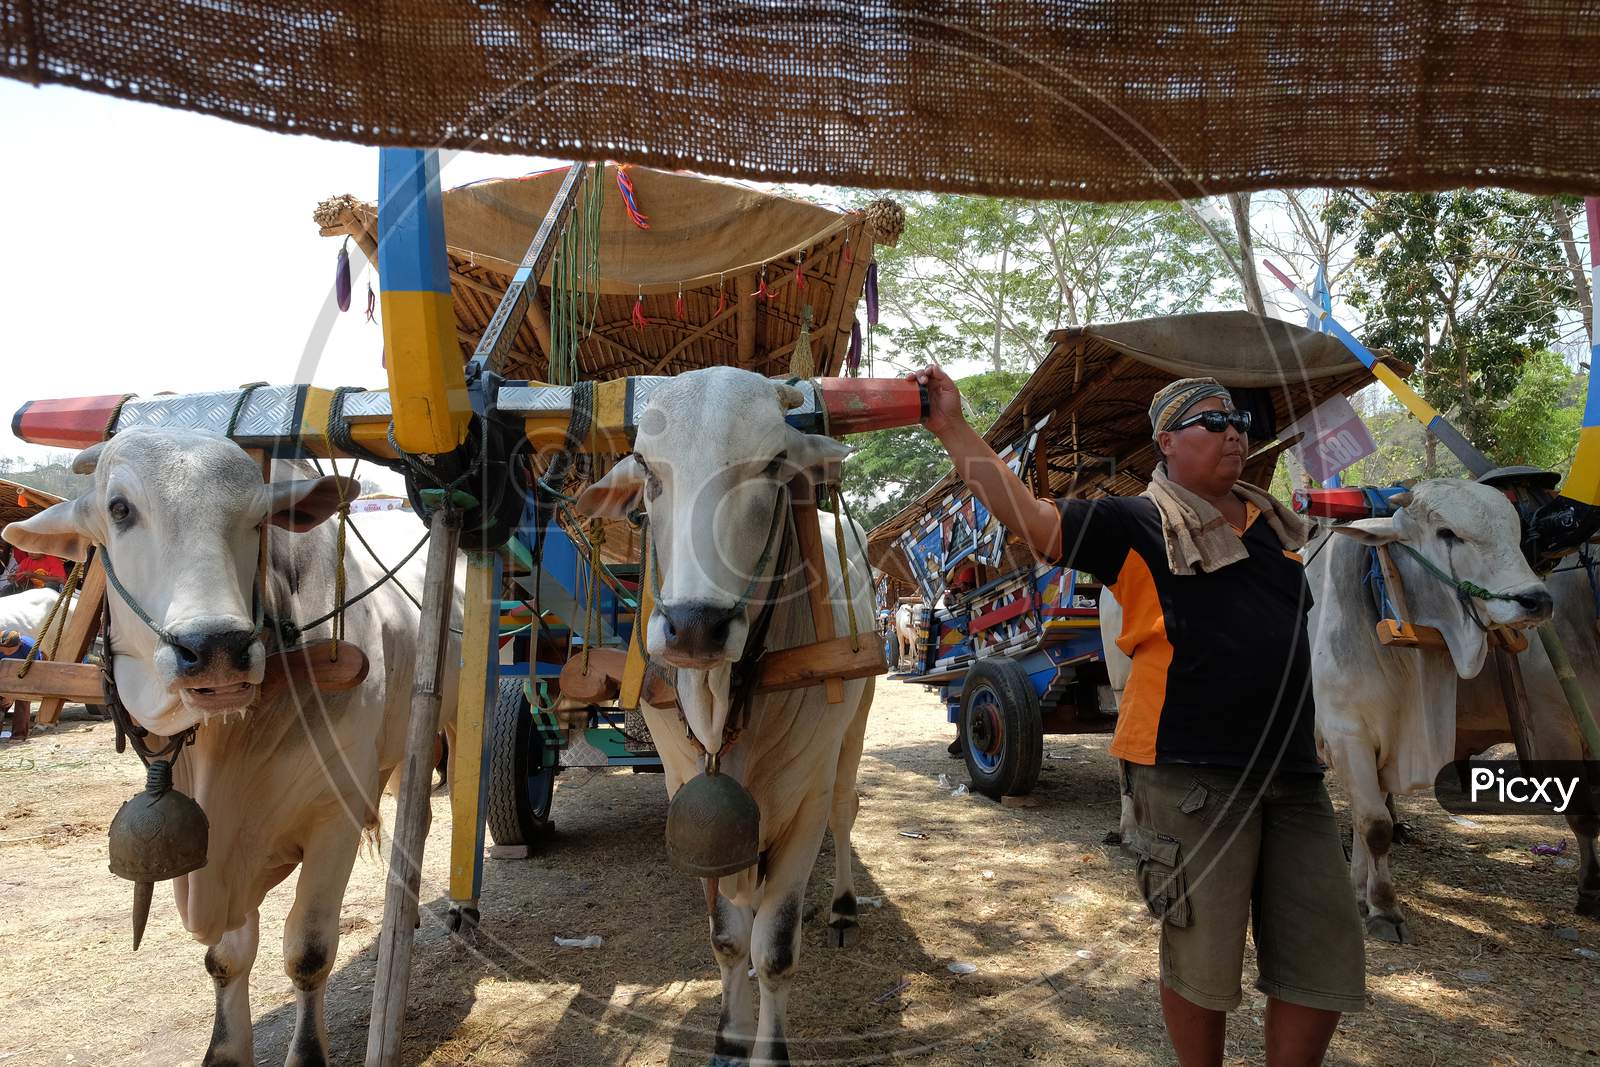 The man who drives a ox cart stands next to his two large cows